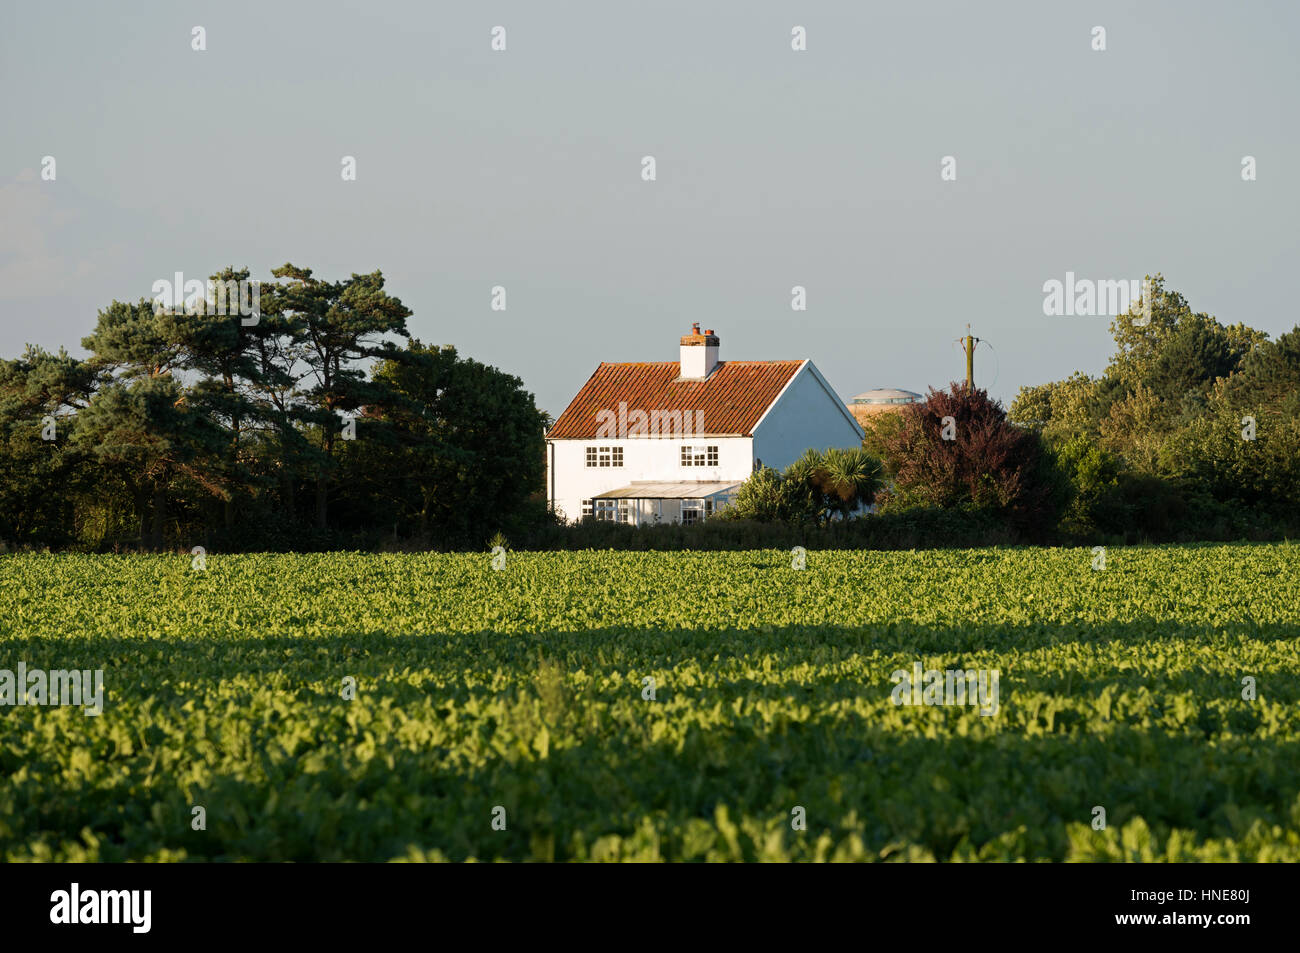 Detached country house, Bawdsey, Suffolk, UK. Stock Photo